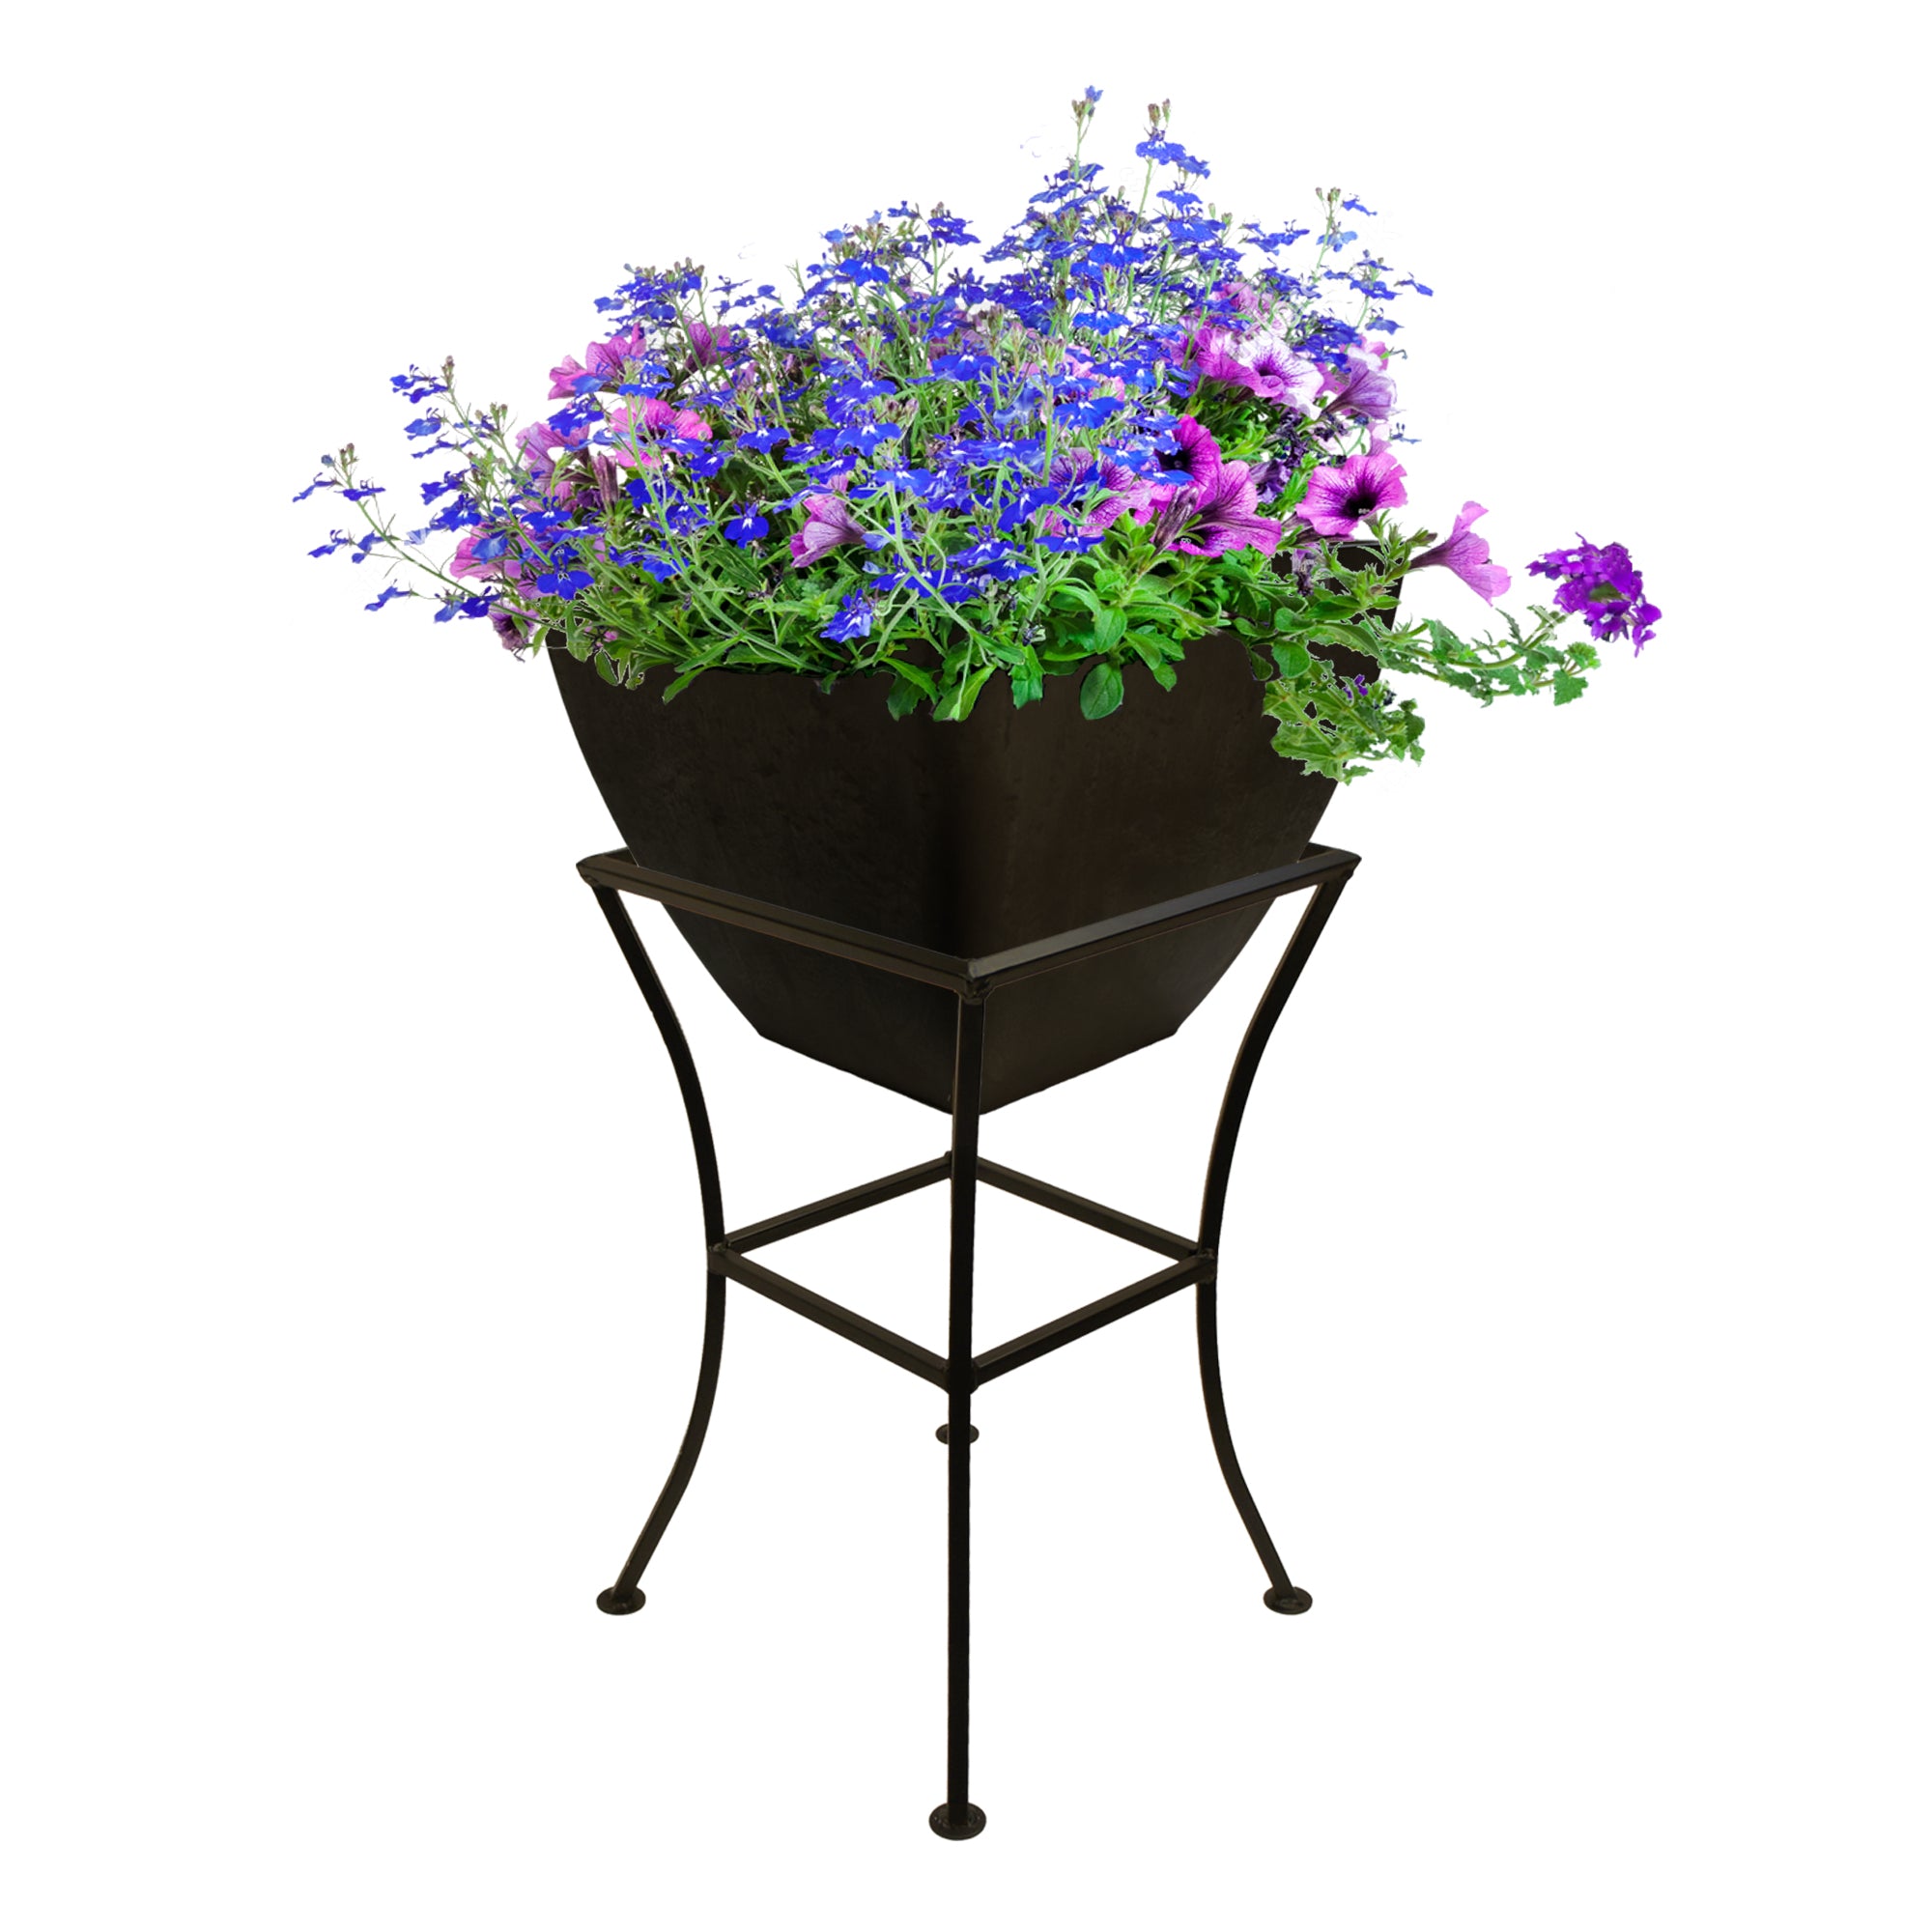 16 inch square planter in graphite with black stand with flowers inside on a white background